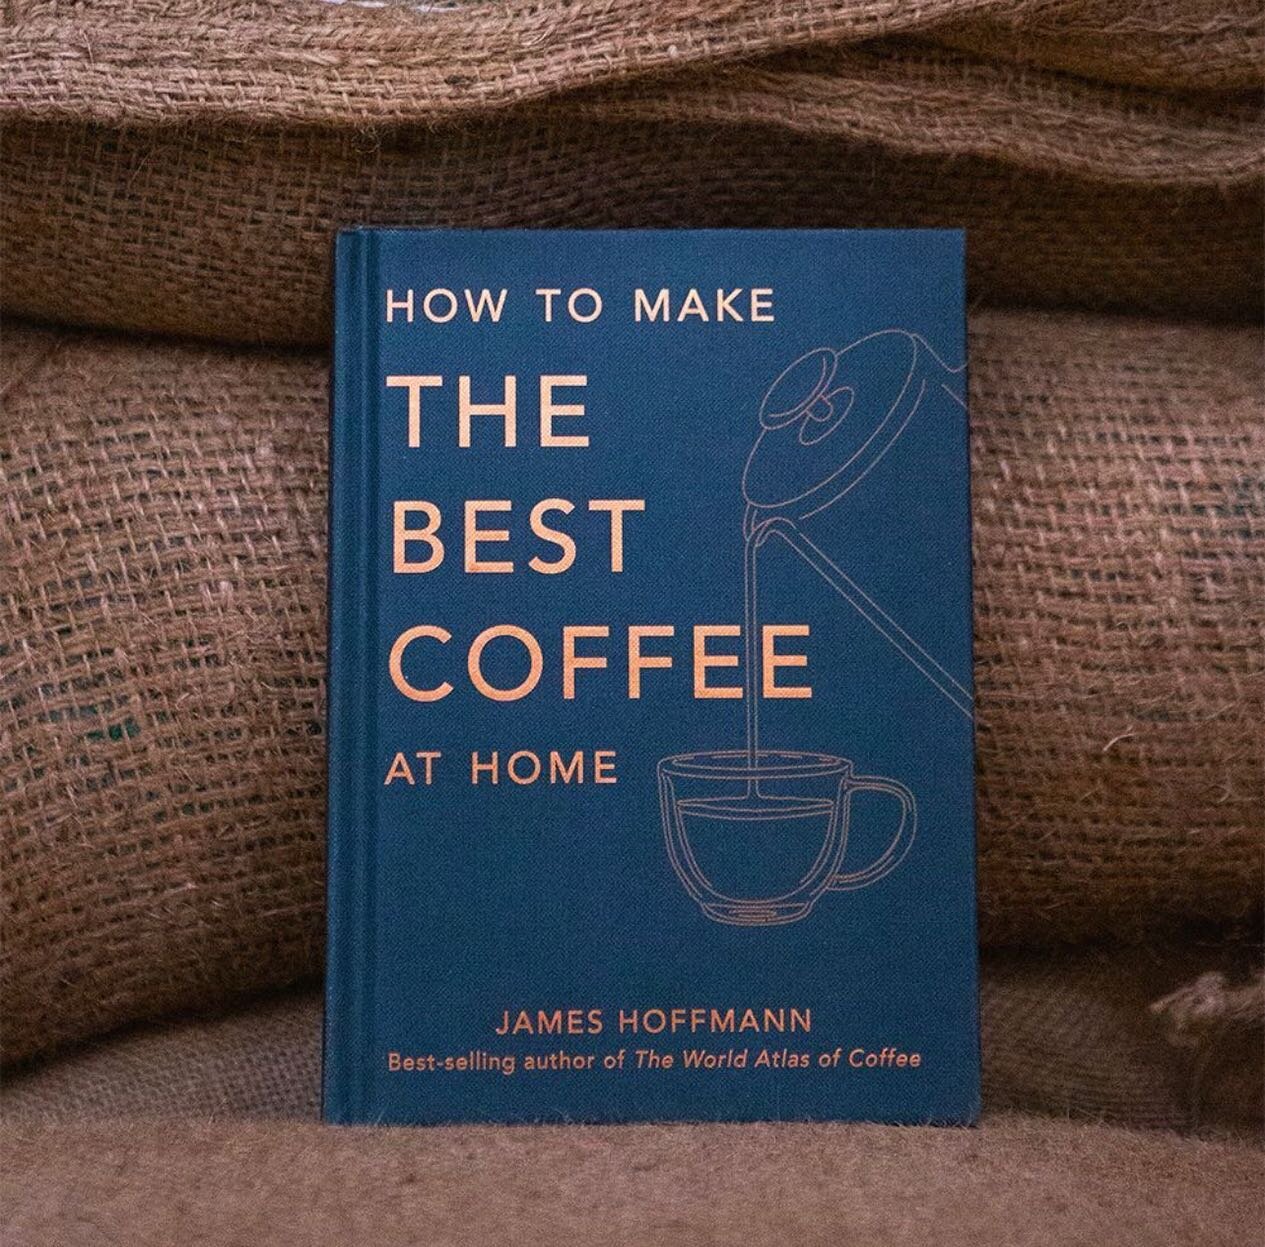 How To Make The Best Coffee At Home by @jimseven. 🤓

In this book, James shares the things that have helped him make better coffee consistently. With repeatable recipes to rely on, whether you are just starting your coffee journey or looking to incr